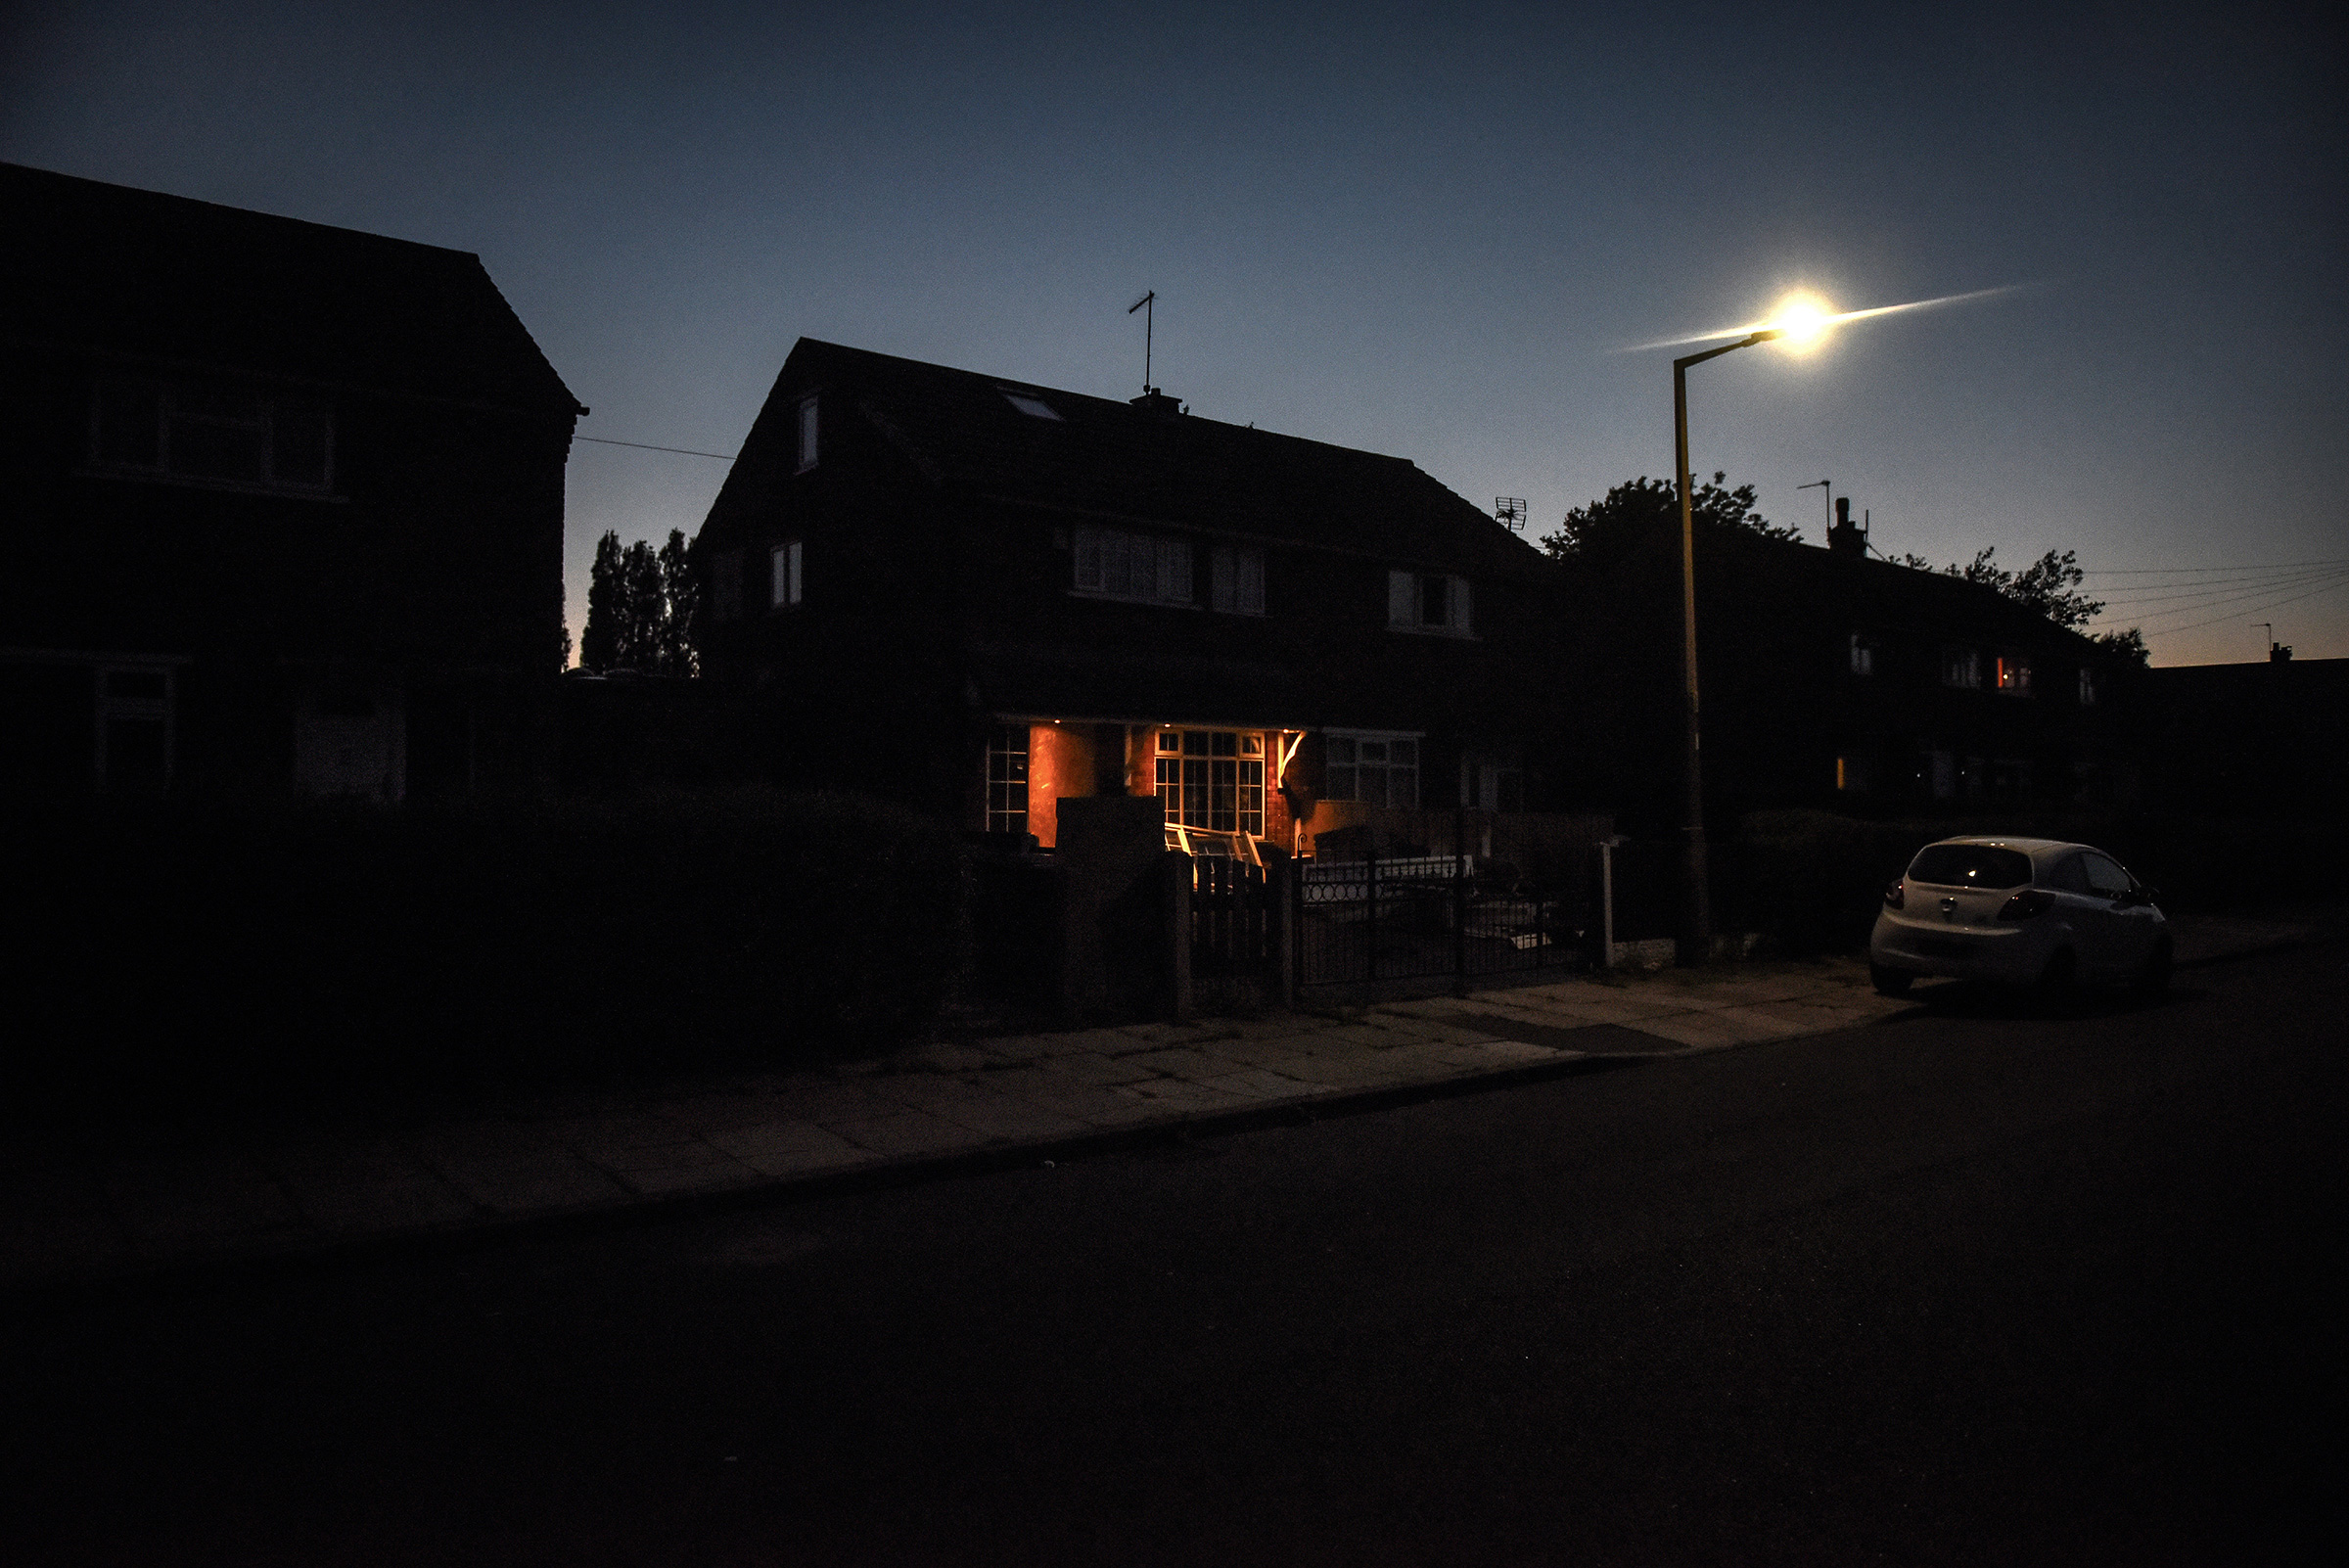 The house where Amy-Leanne Stringfellow, 26, was killed on June 5, in Balby, England, photographed on June 21, 2020. (Mary Turner—The New York Times/Redux)